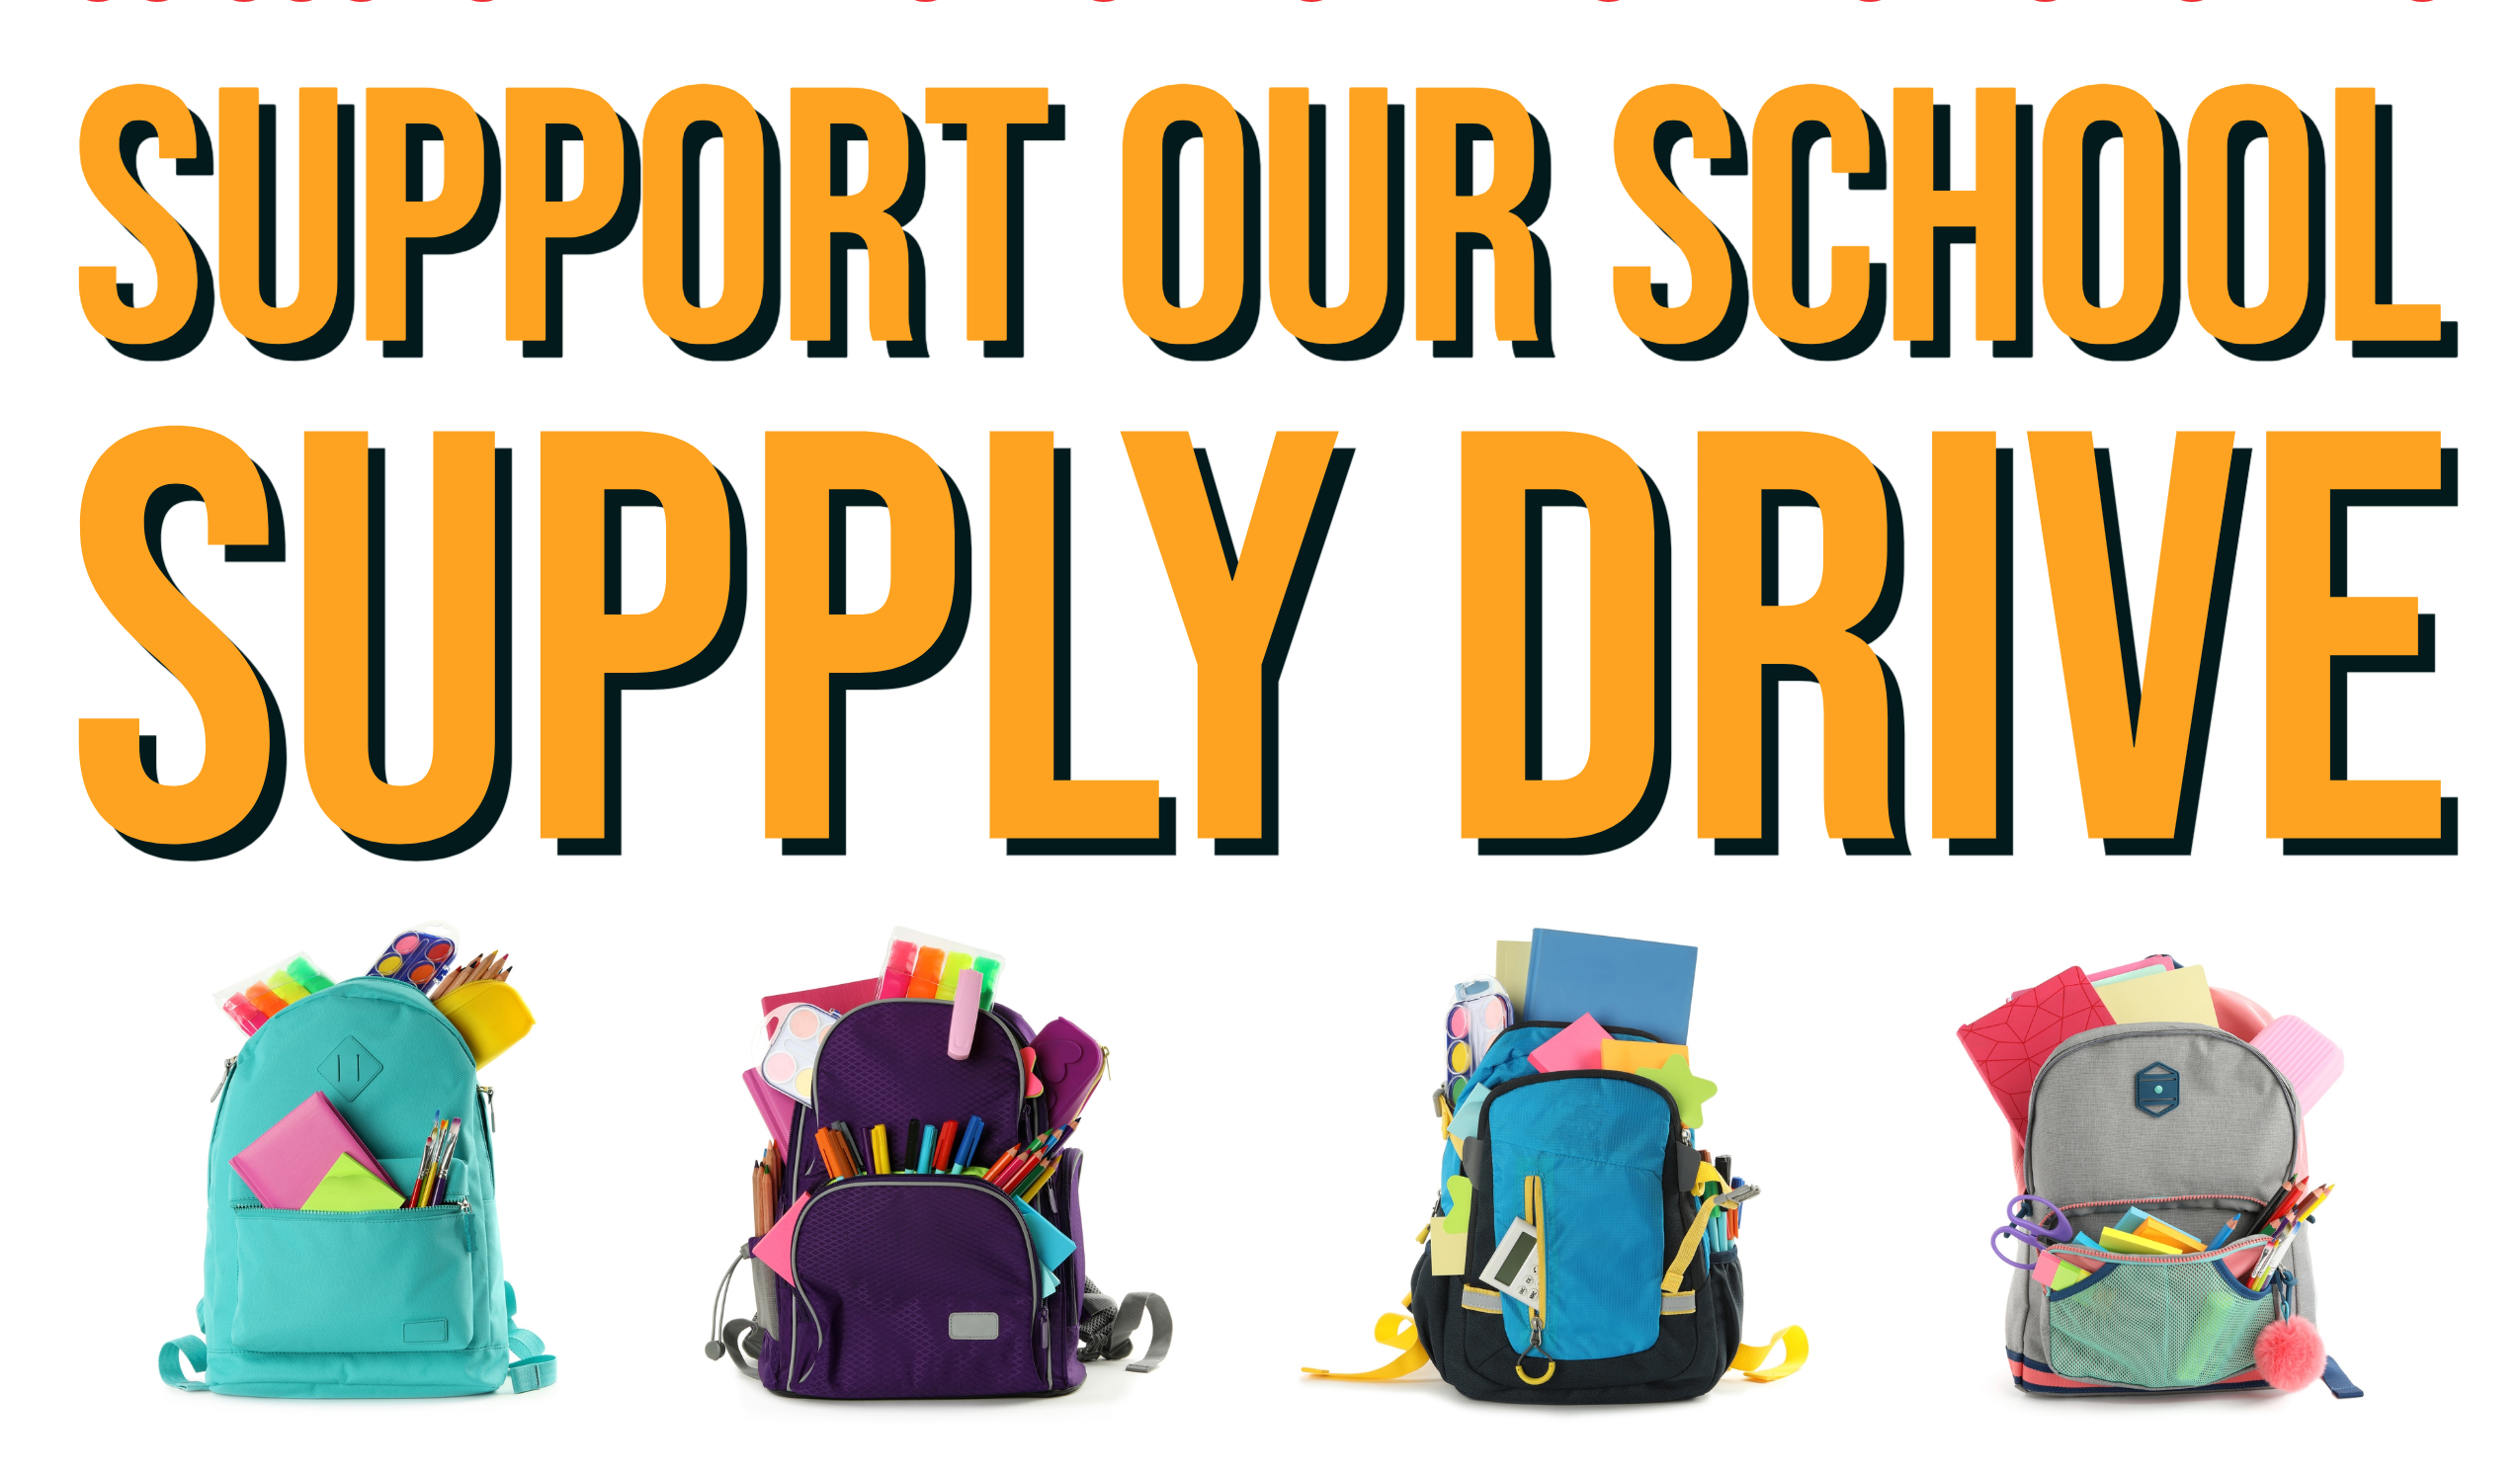 Image of 4 full backpacks. Text reads Support our school supply drive.